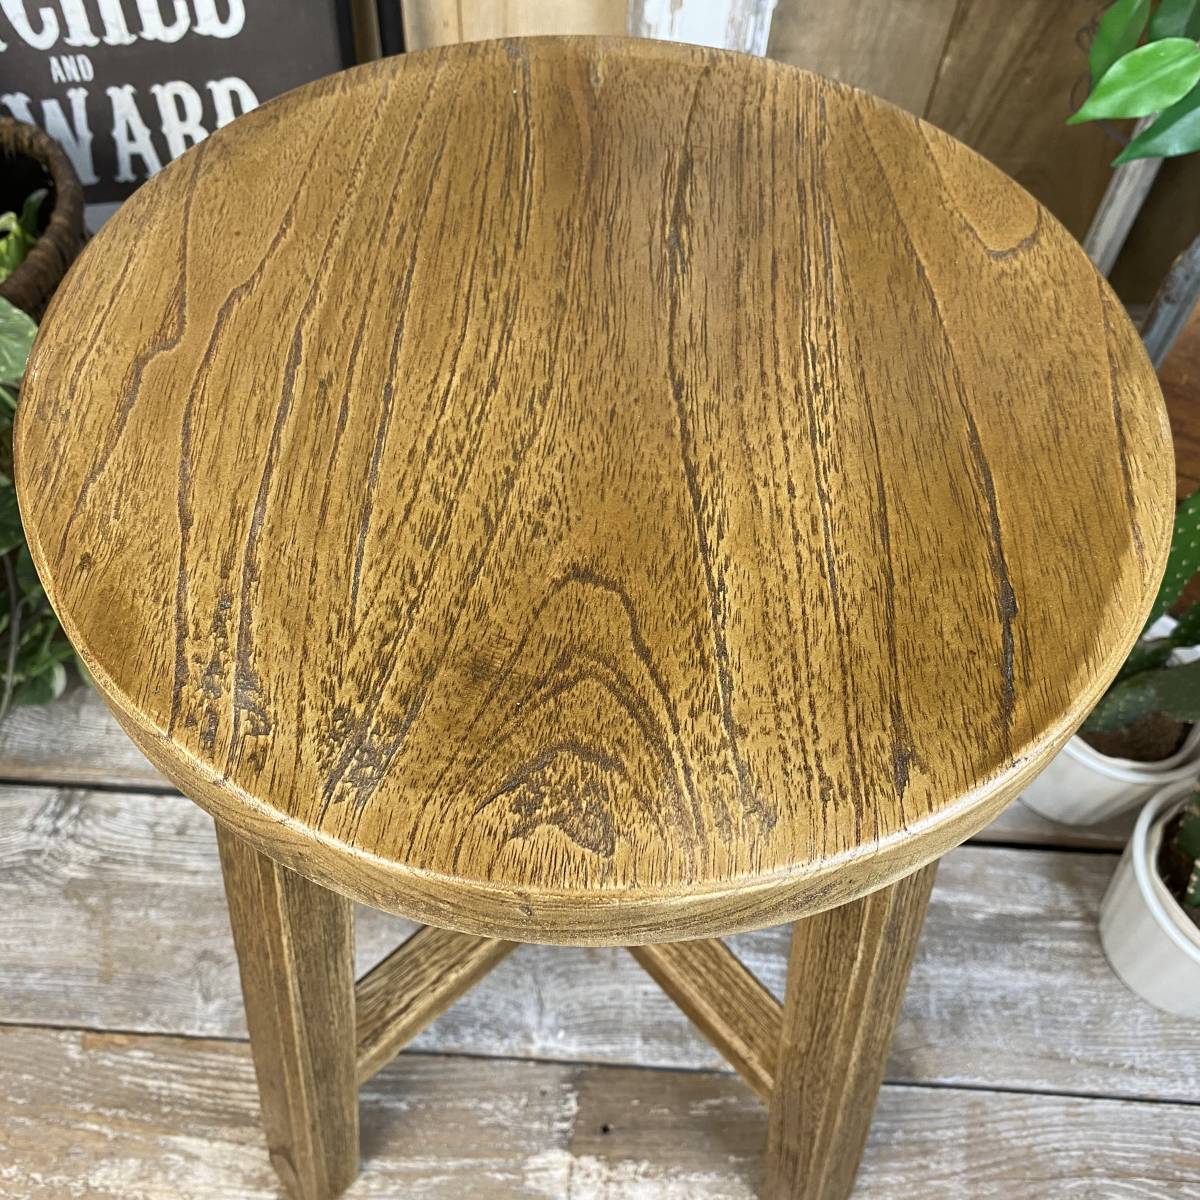  Asian furniture large sale! free shipping natural tree natural wood minti circle stool chair wooden Indonesia,minti material, chair, wood grain, retro, modern, chair 